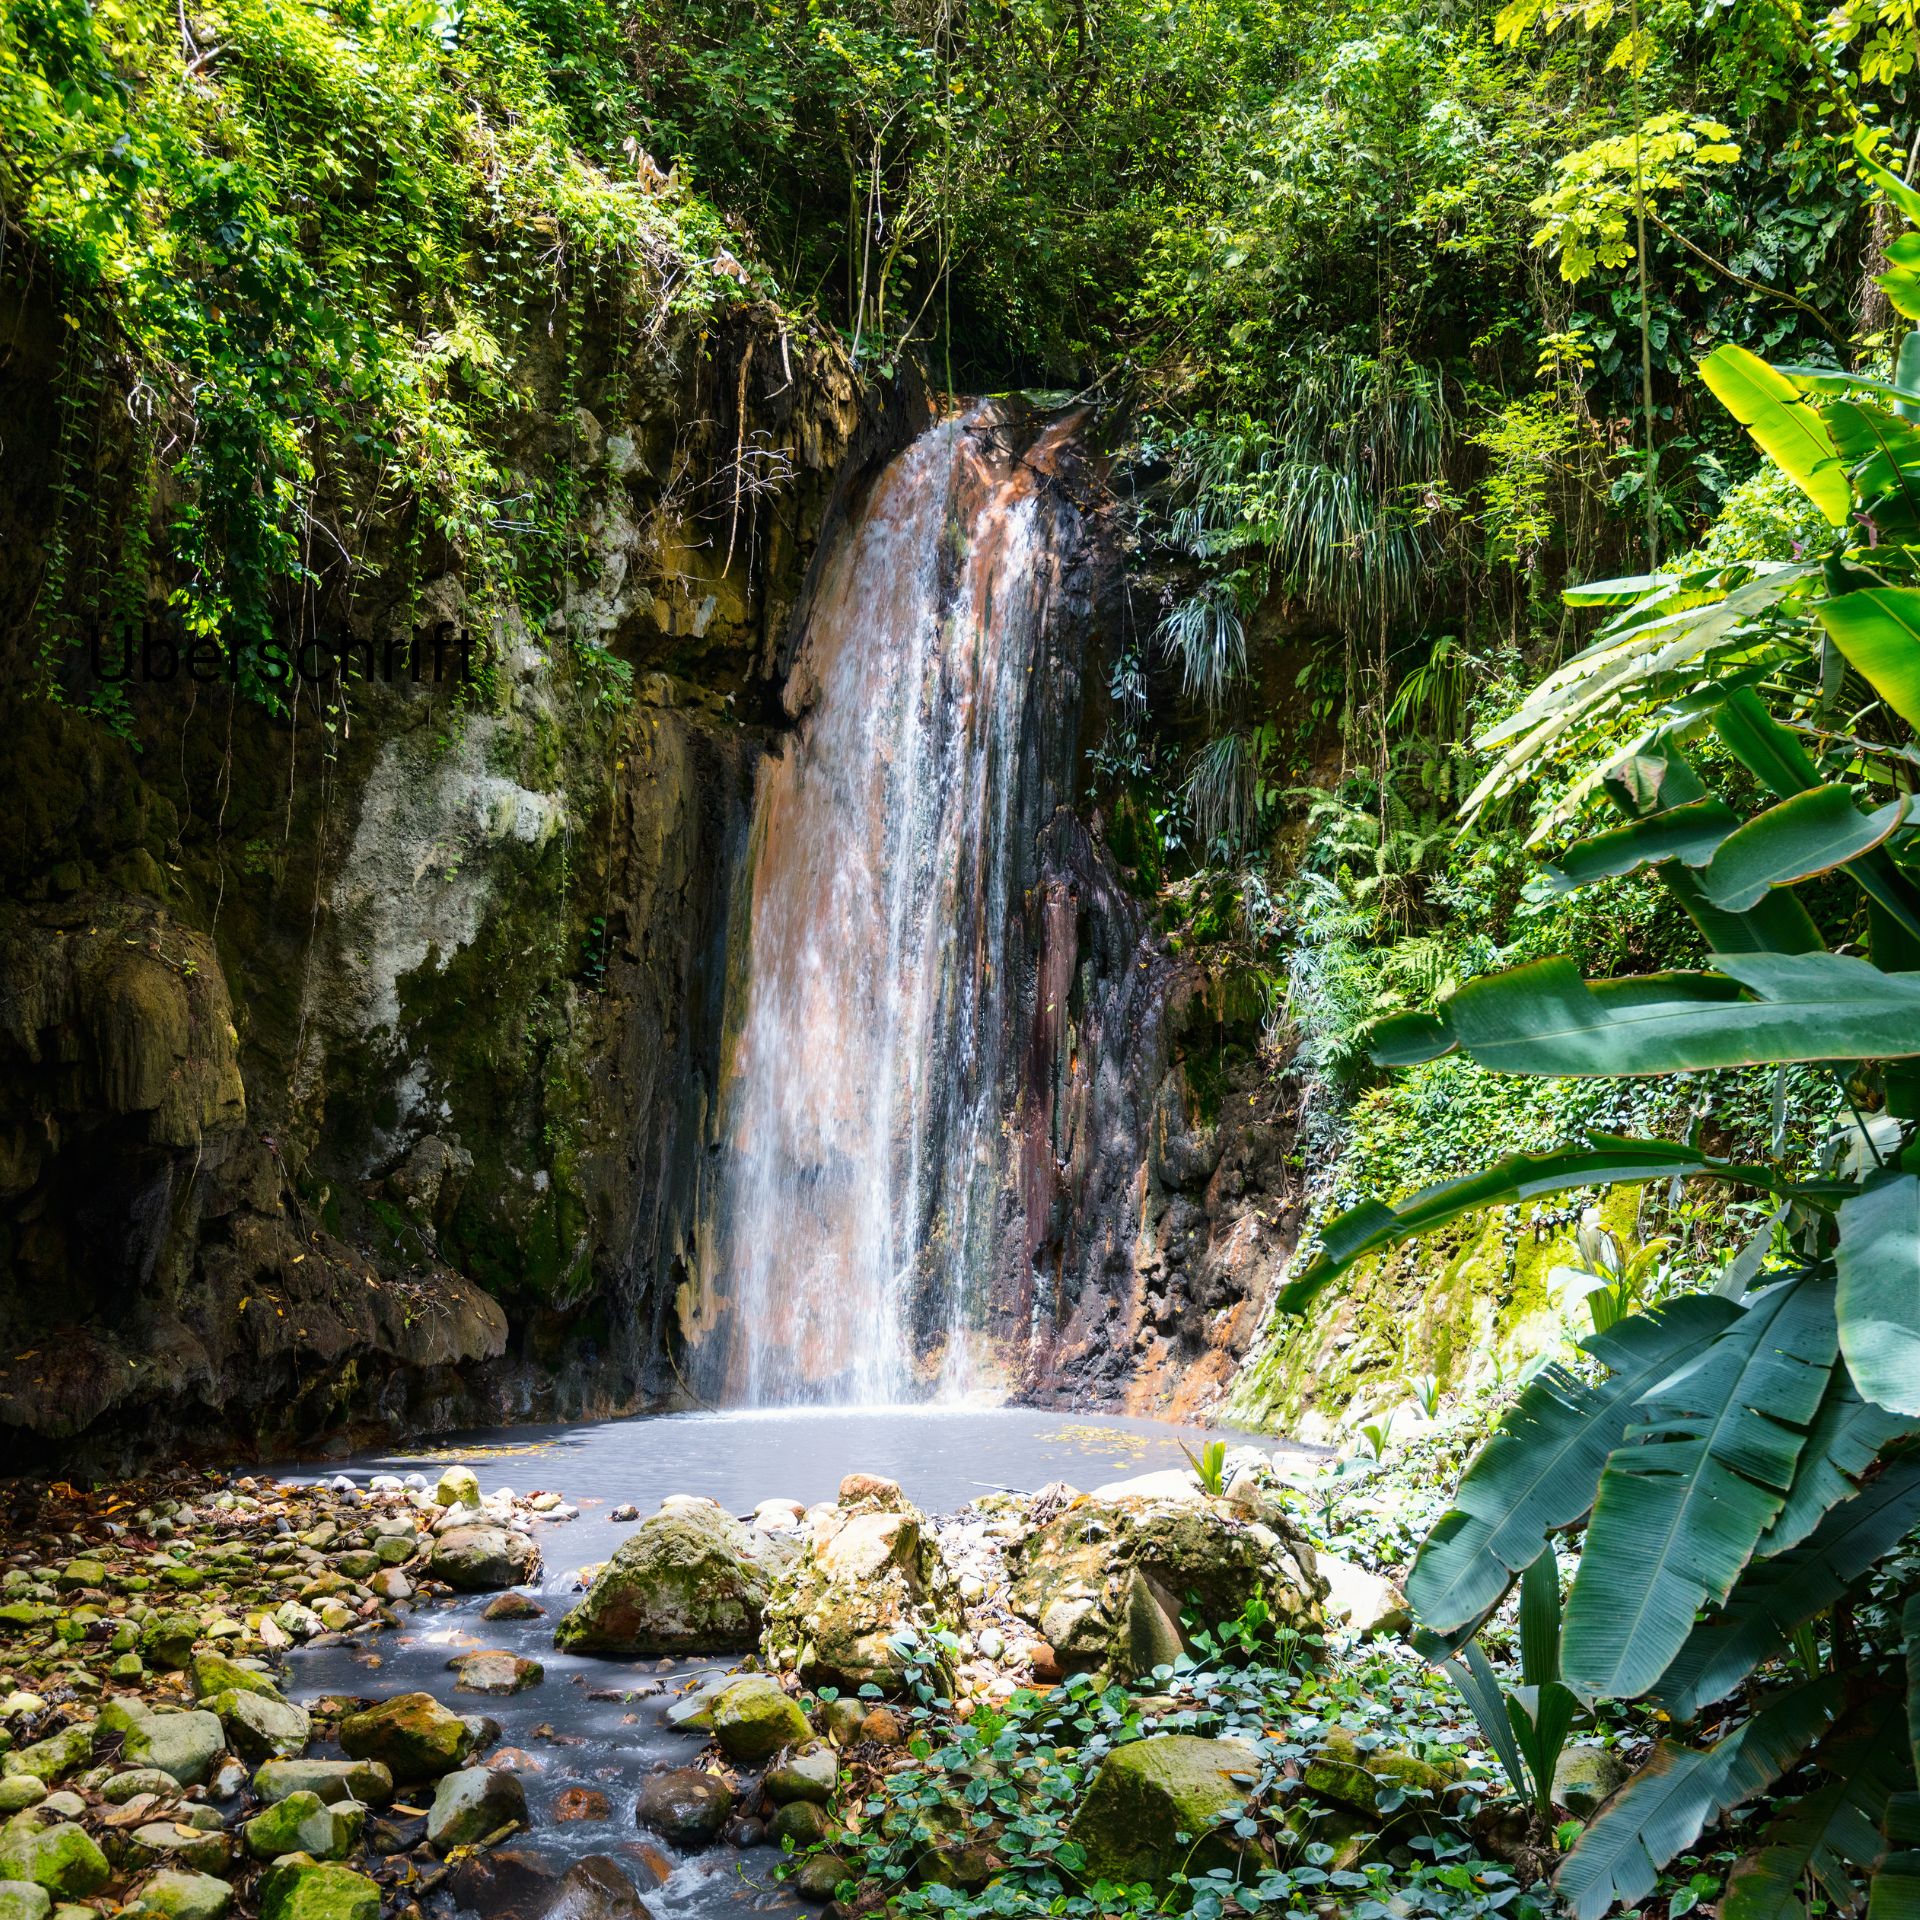 The Initiatives and Impact of Preserving Saint Lucia's Rainforests